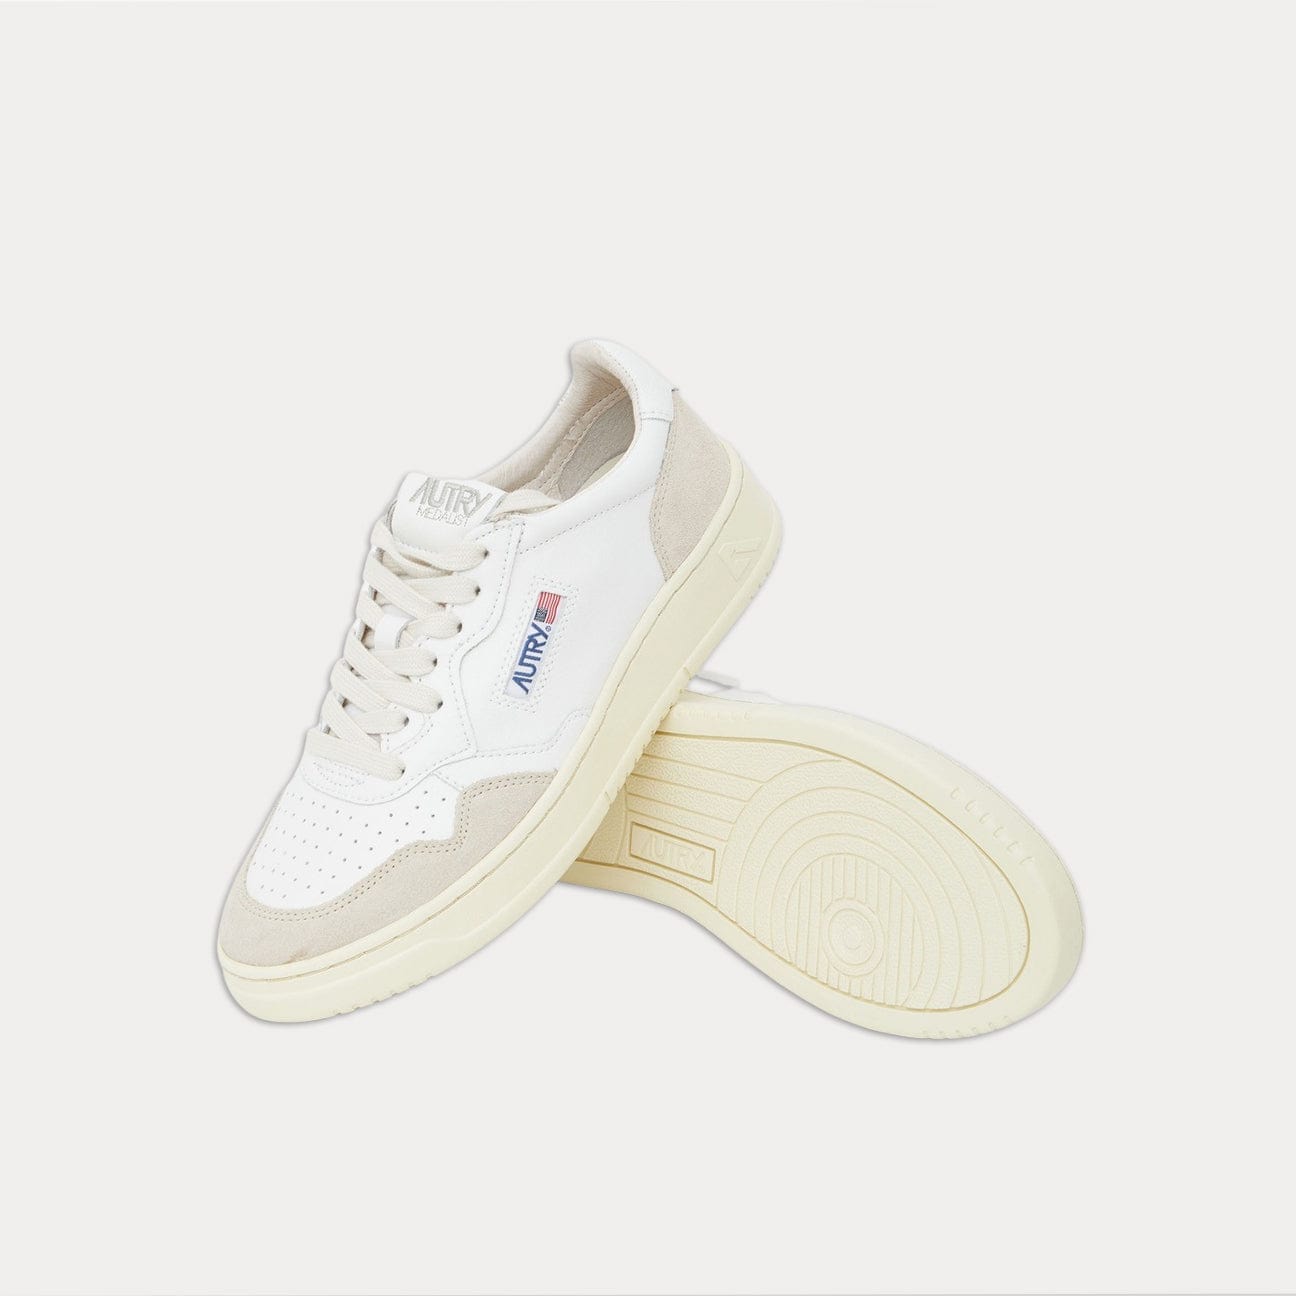 AUTRY Sneakers Medalist Low Bianco